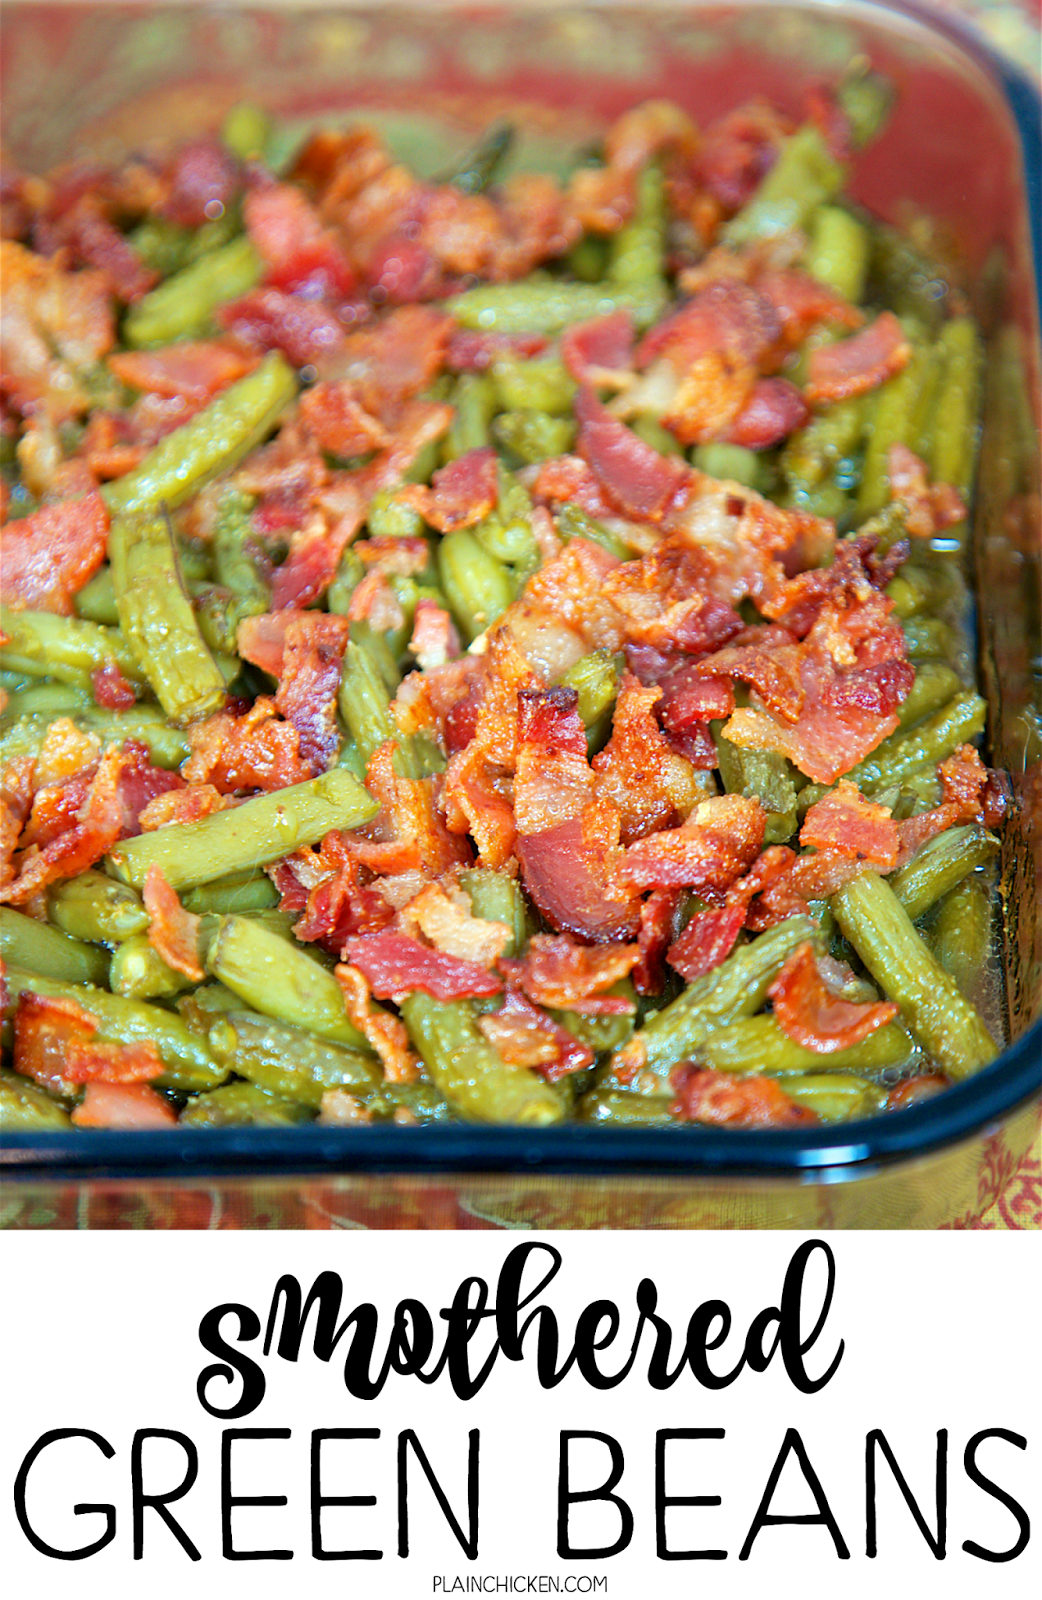 Smothered Green Beans - Plain Chicken